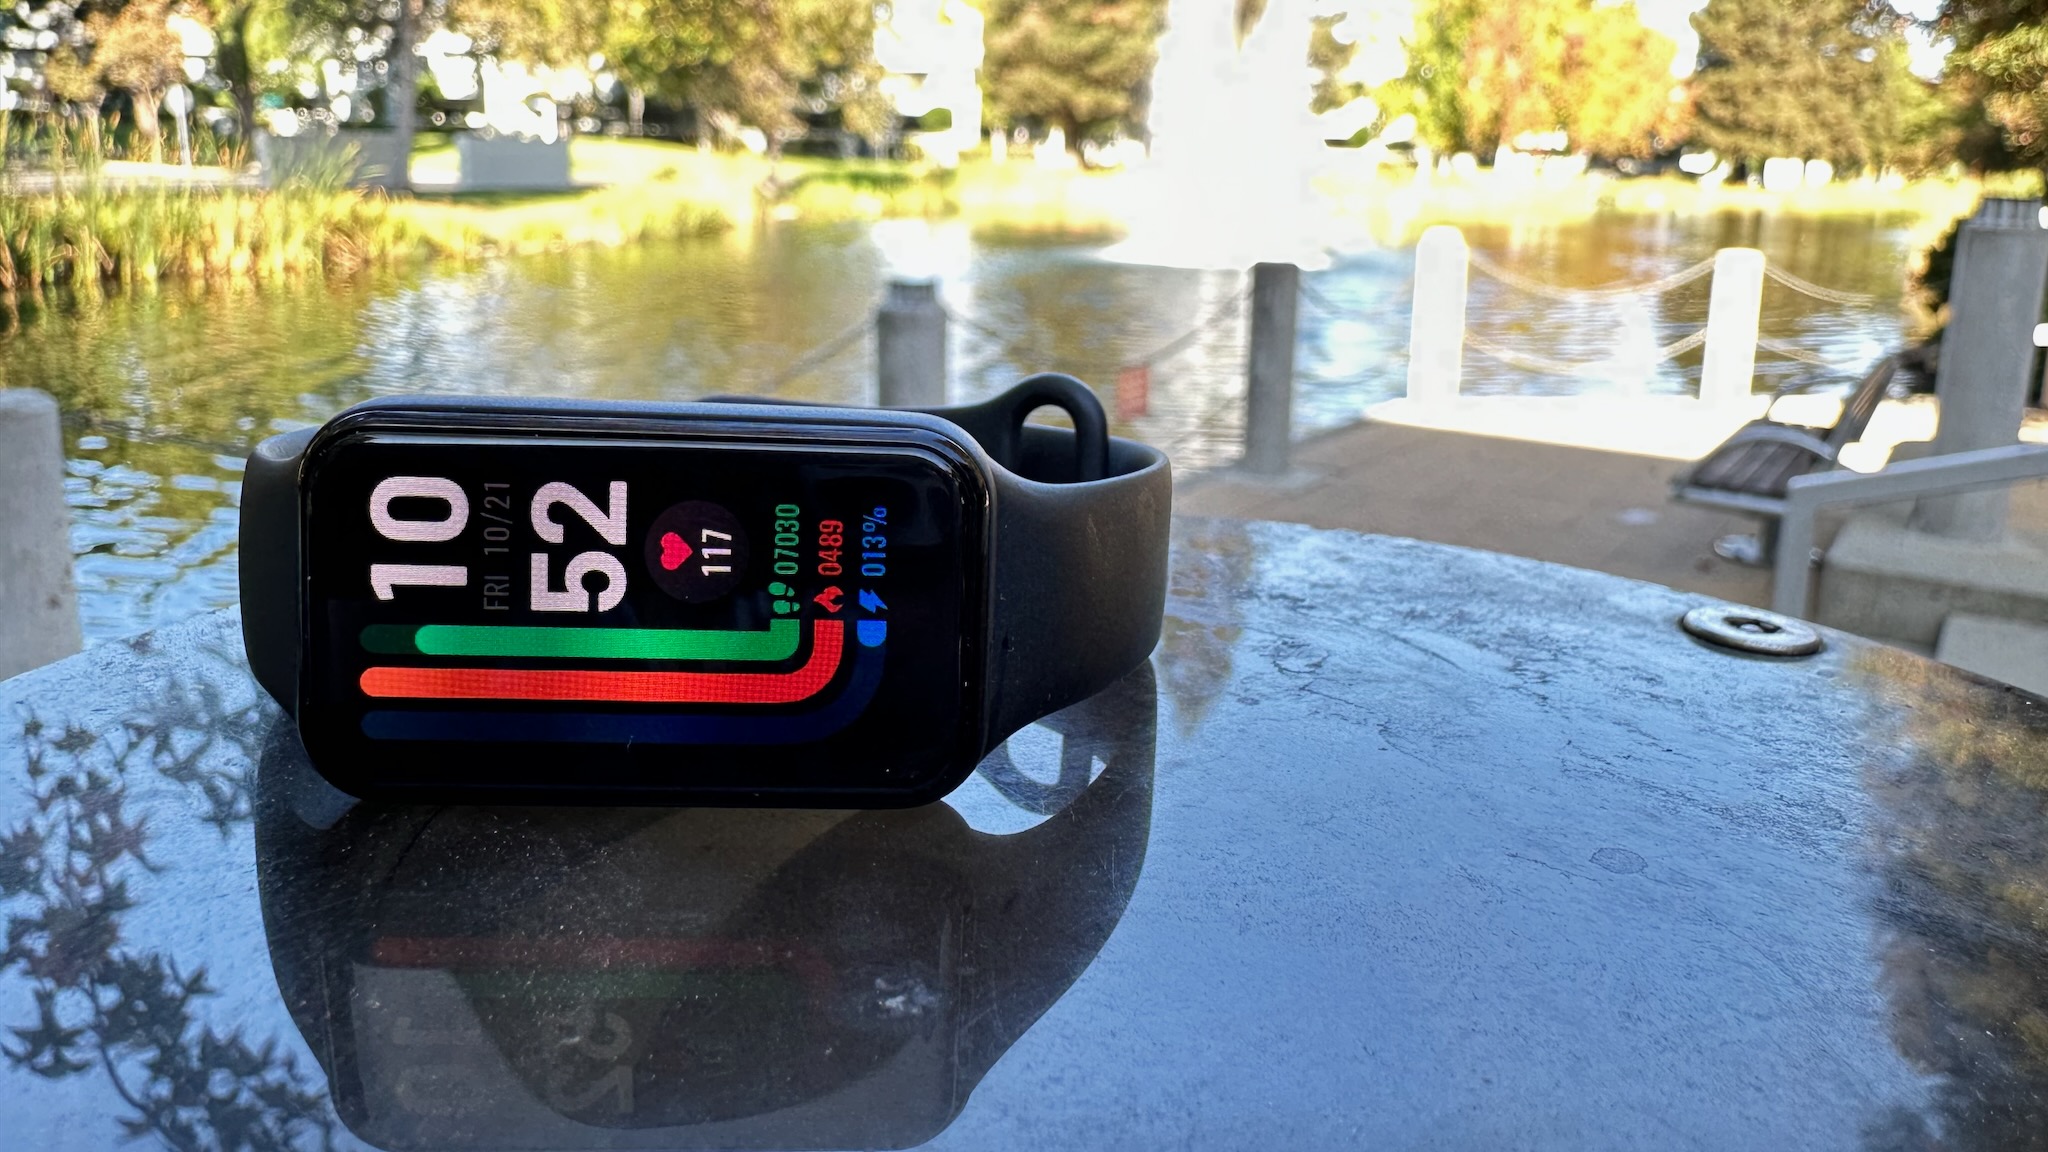 Amazfit Band 7 review: The ideal budget fitness tracker for casual